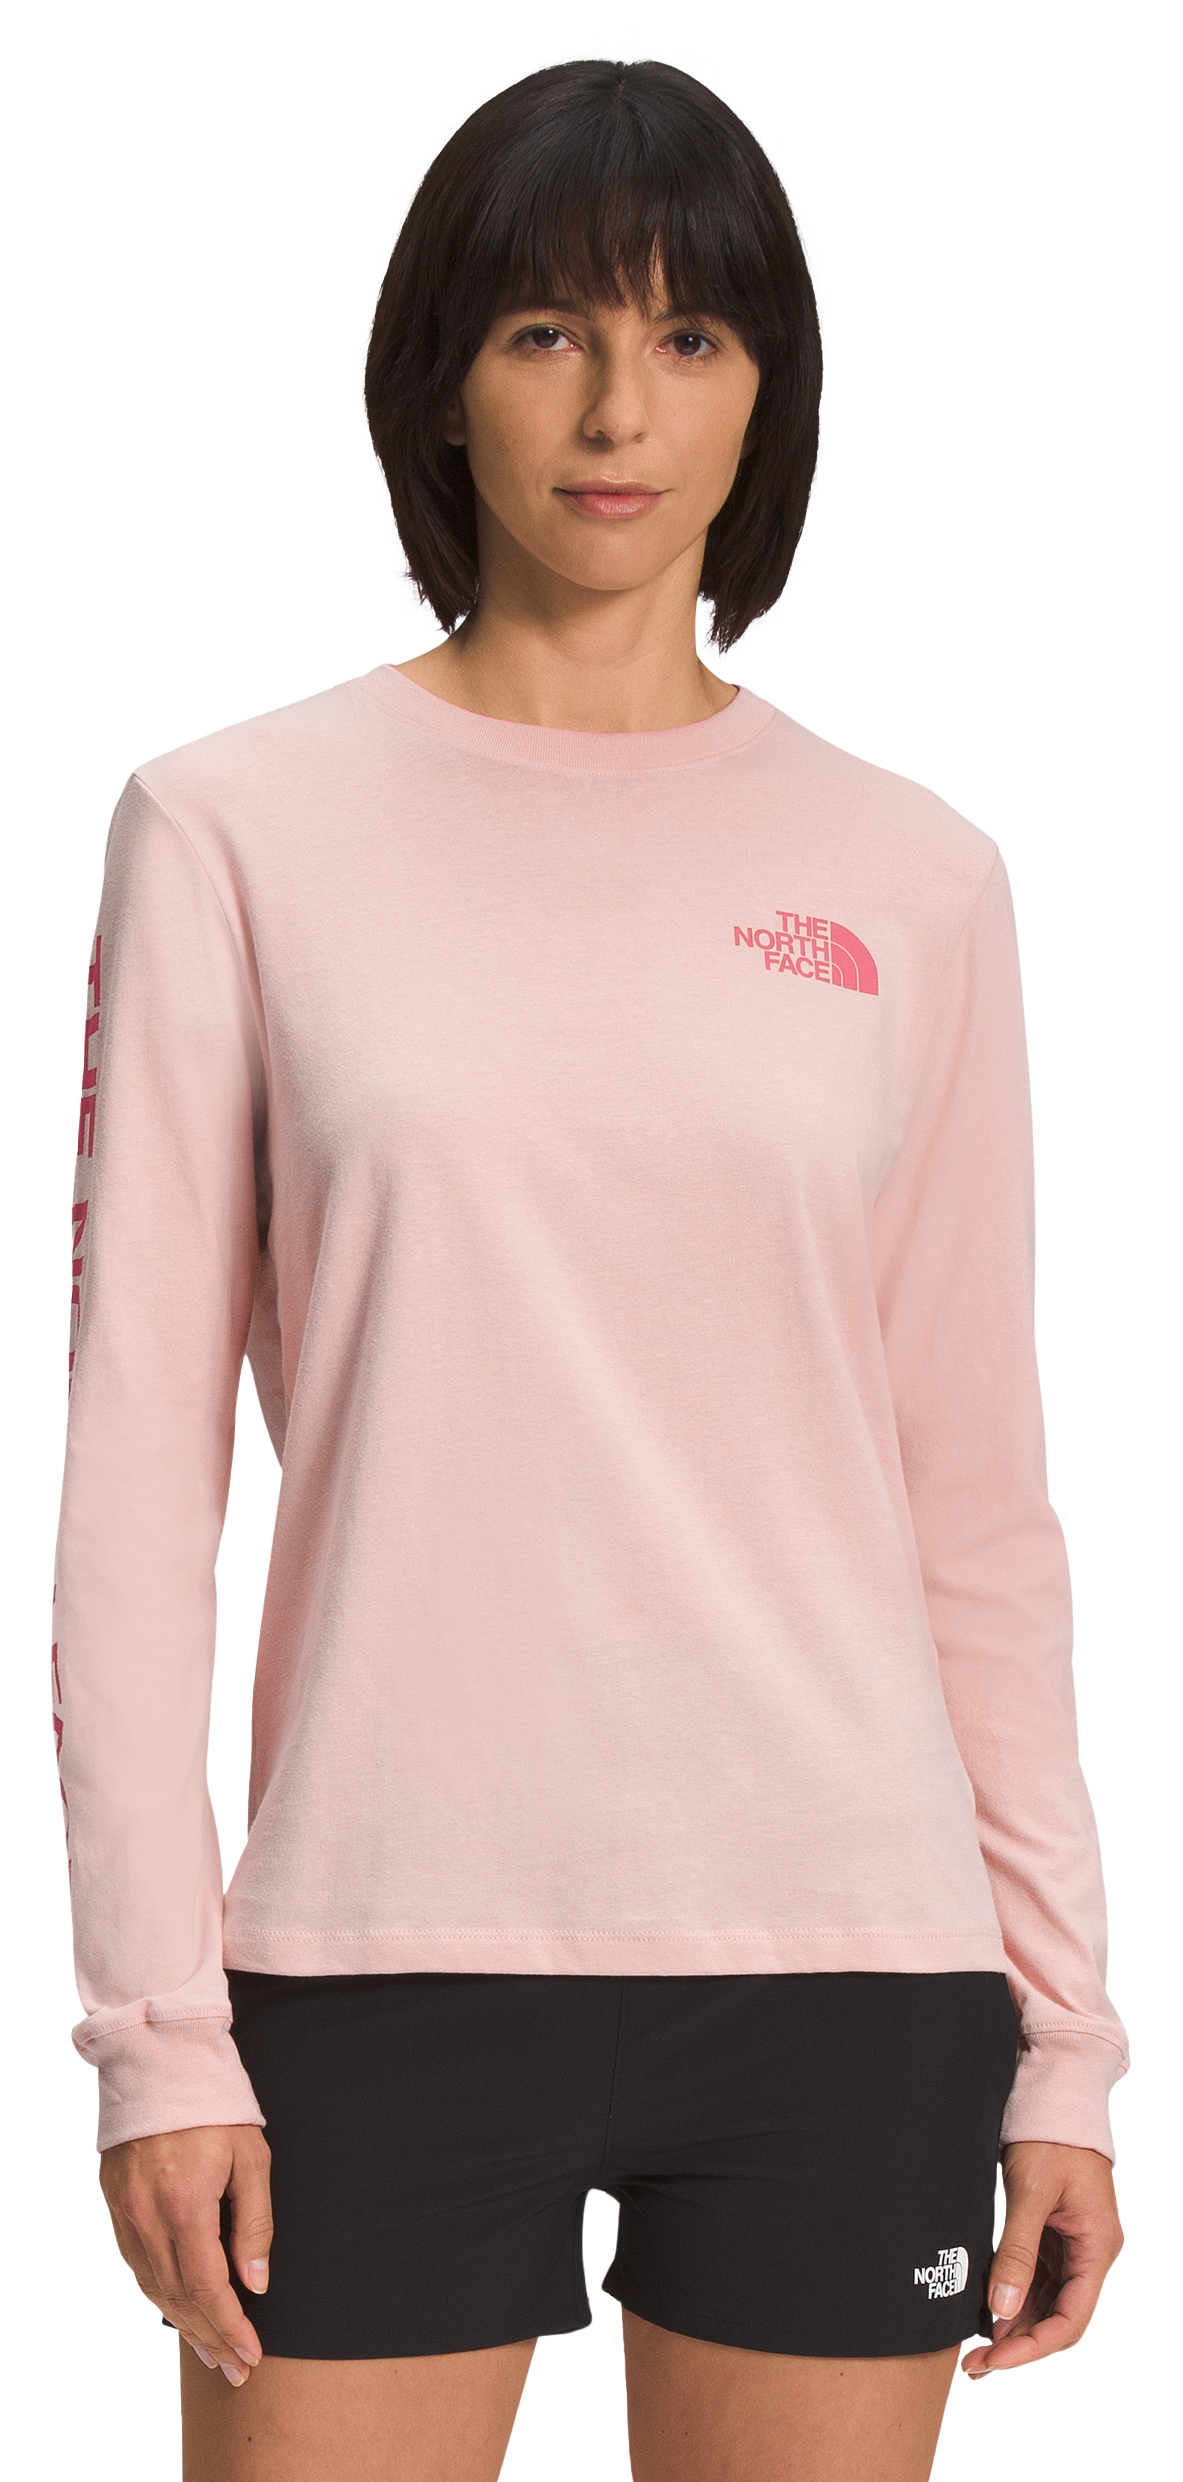 The North Face Hit Graphic Long-Sleeve T-Shirt for Ladies - Pink Moss/Cosmo Pink - S